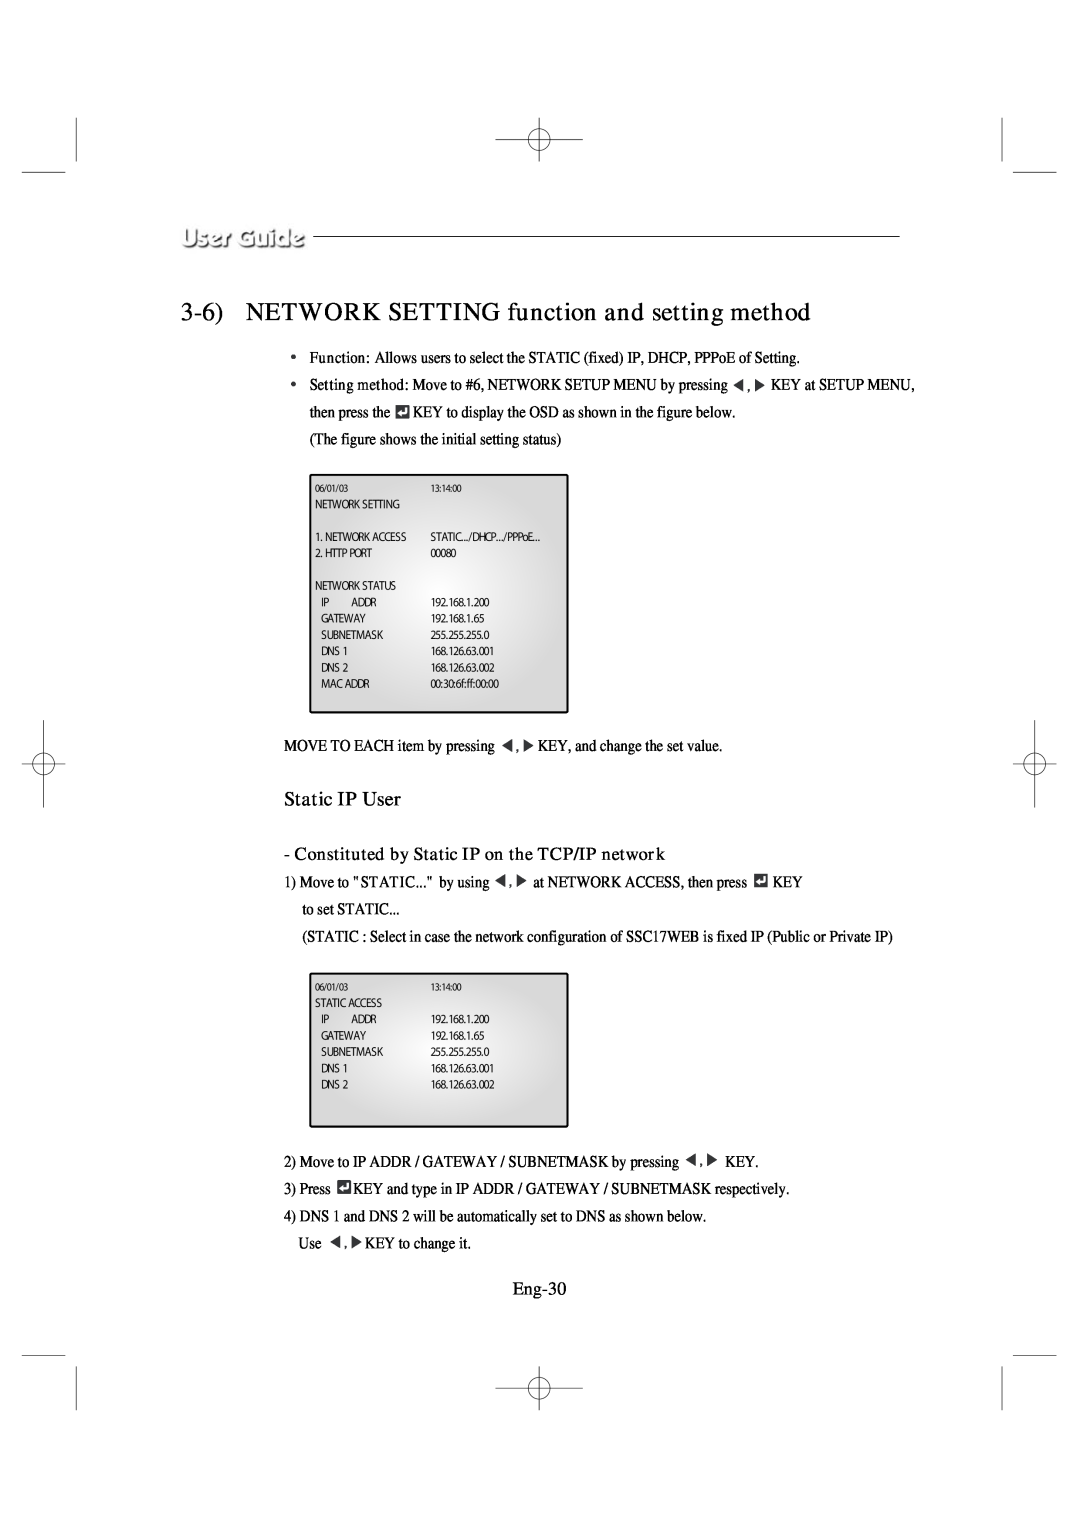 Samsung SSC17WEB manual 3-6NETWORK SETTING function and setting method, Static IP User 